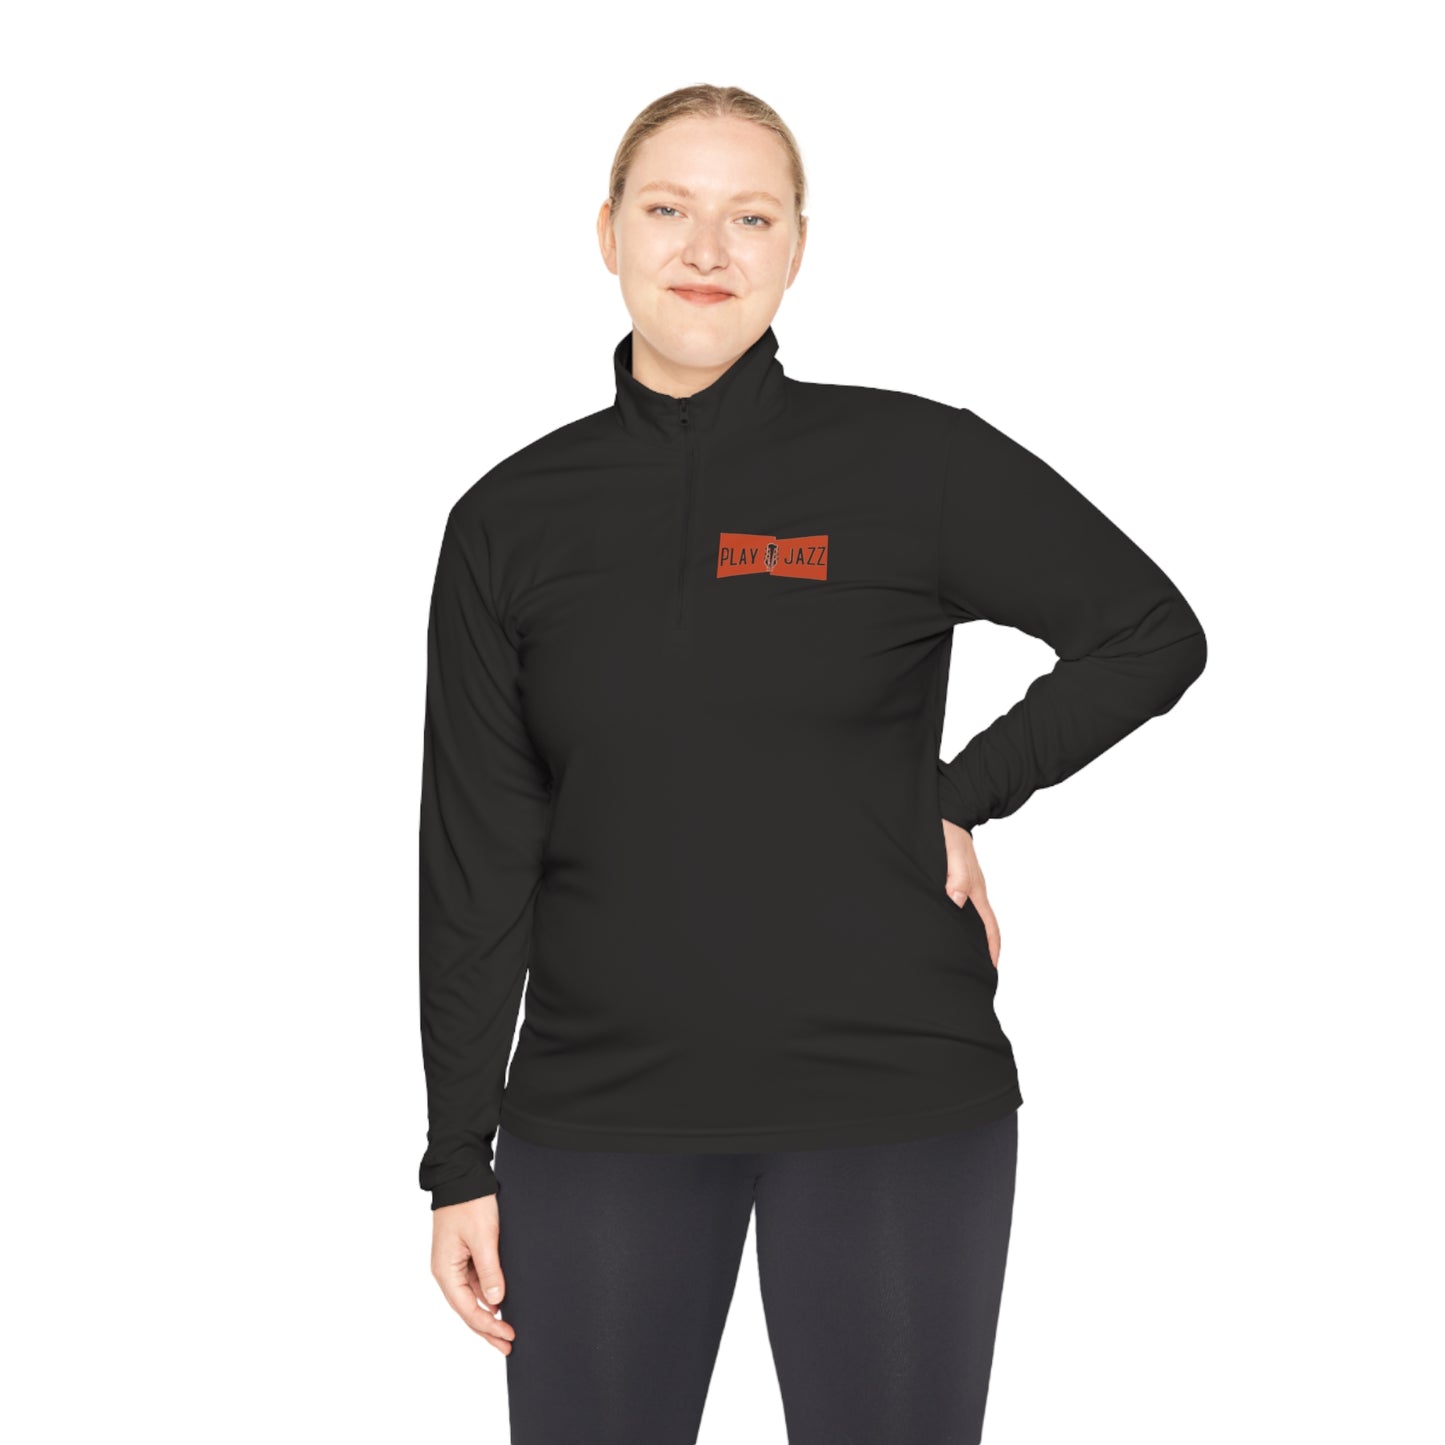 Play Jazz Unisex Zip Pullover (Relaxed Fit)